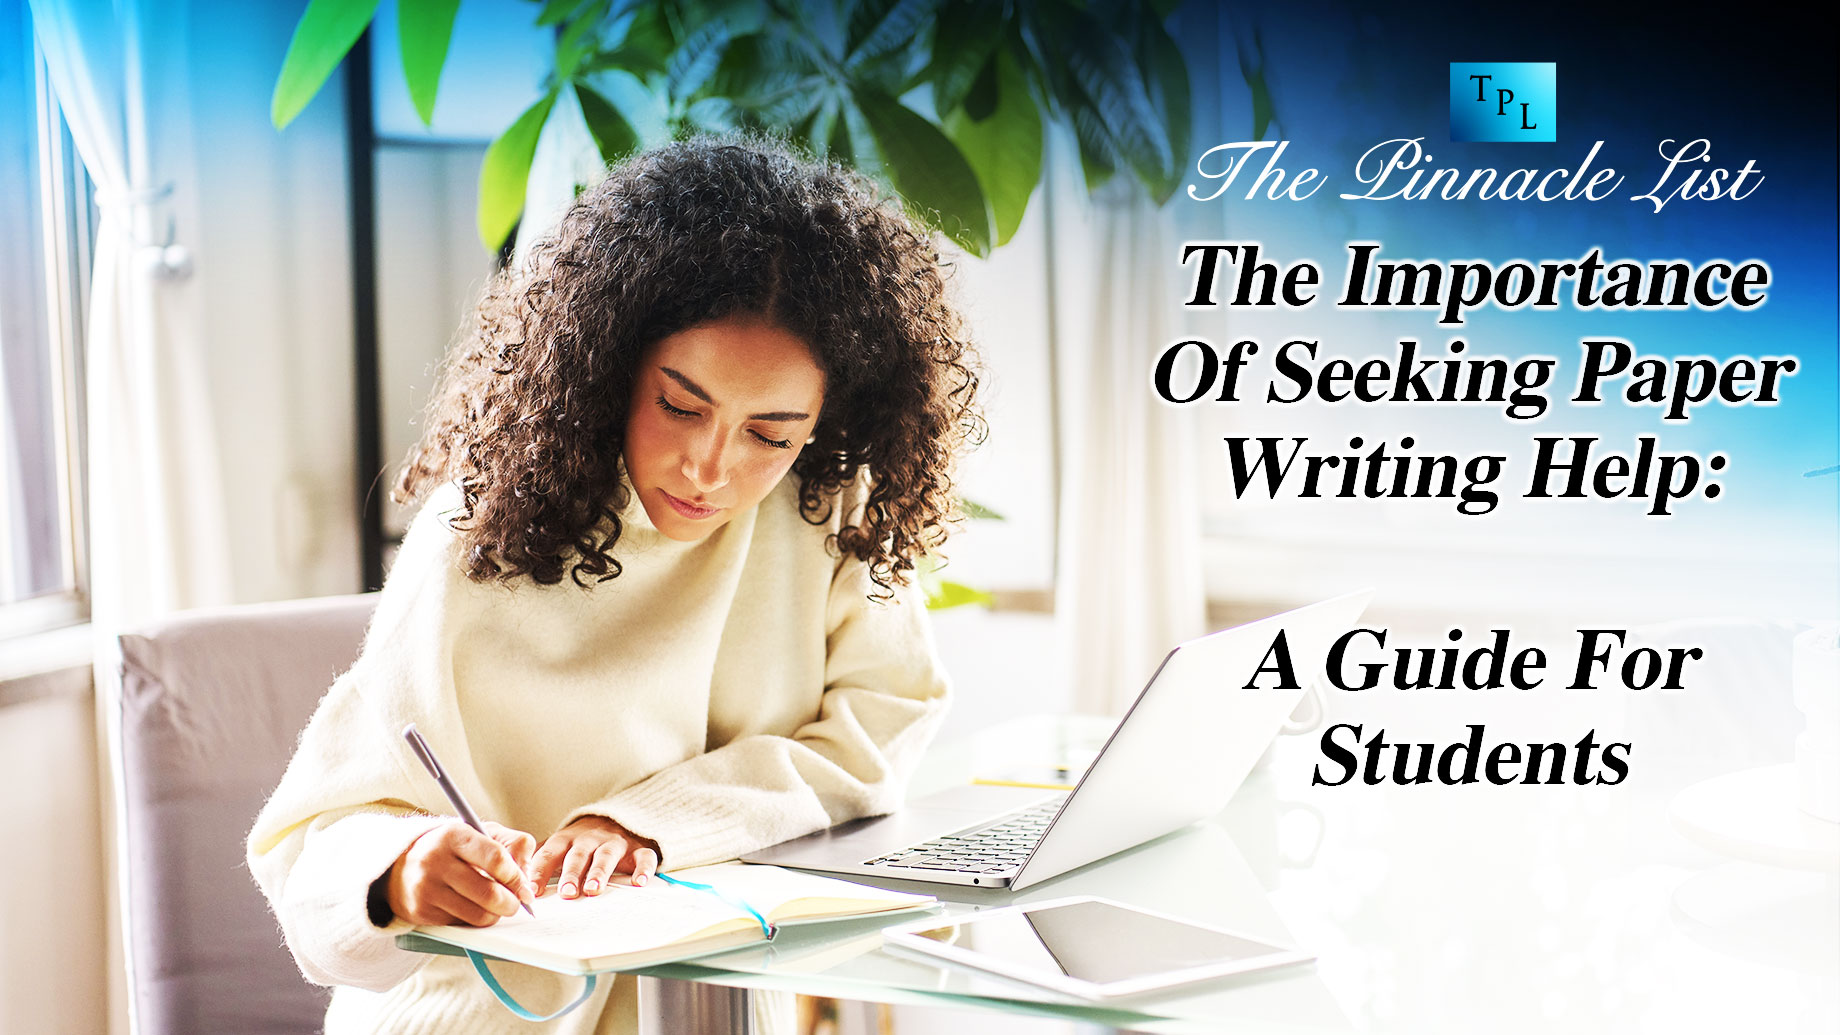 The Importance Of Seeking Paper Writing Help: A Guide For Students